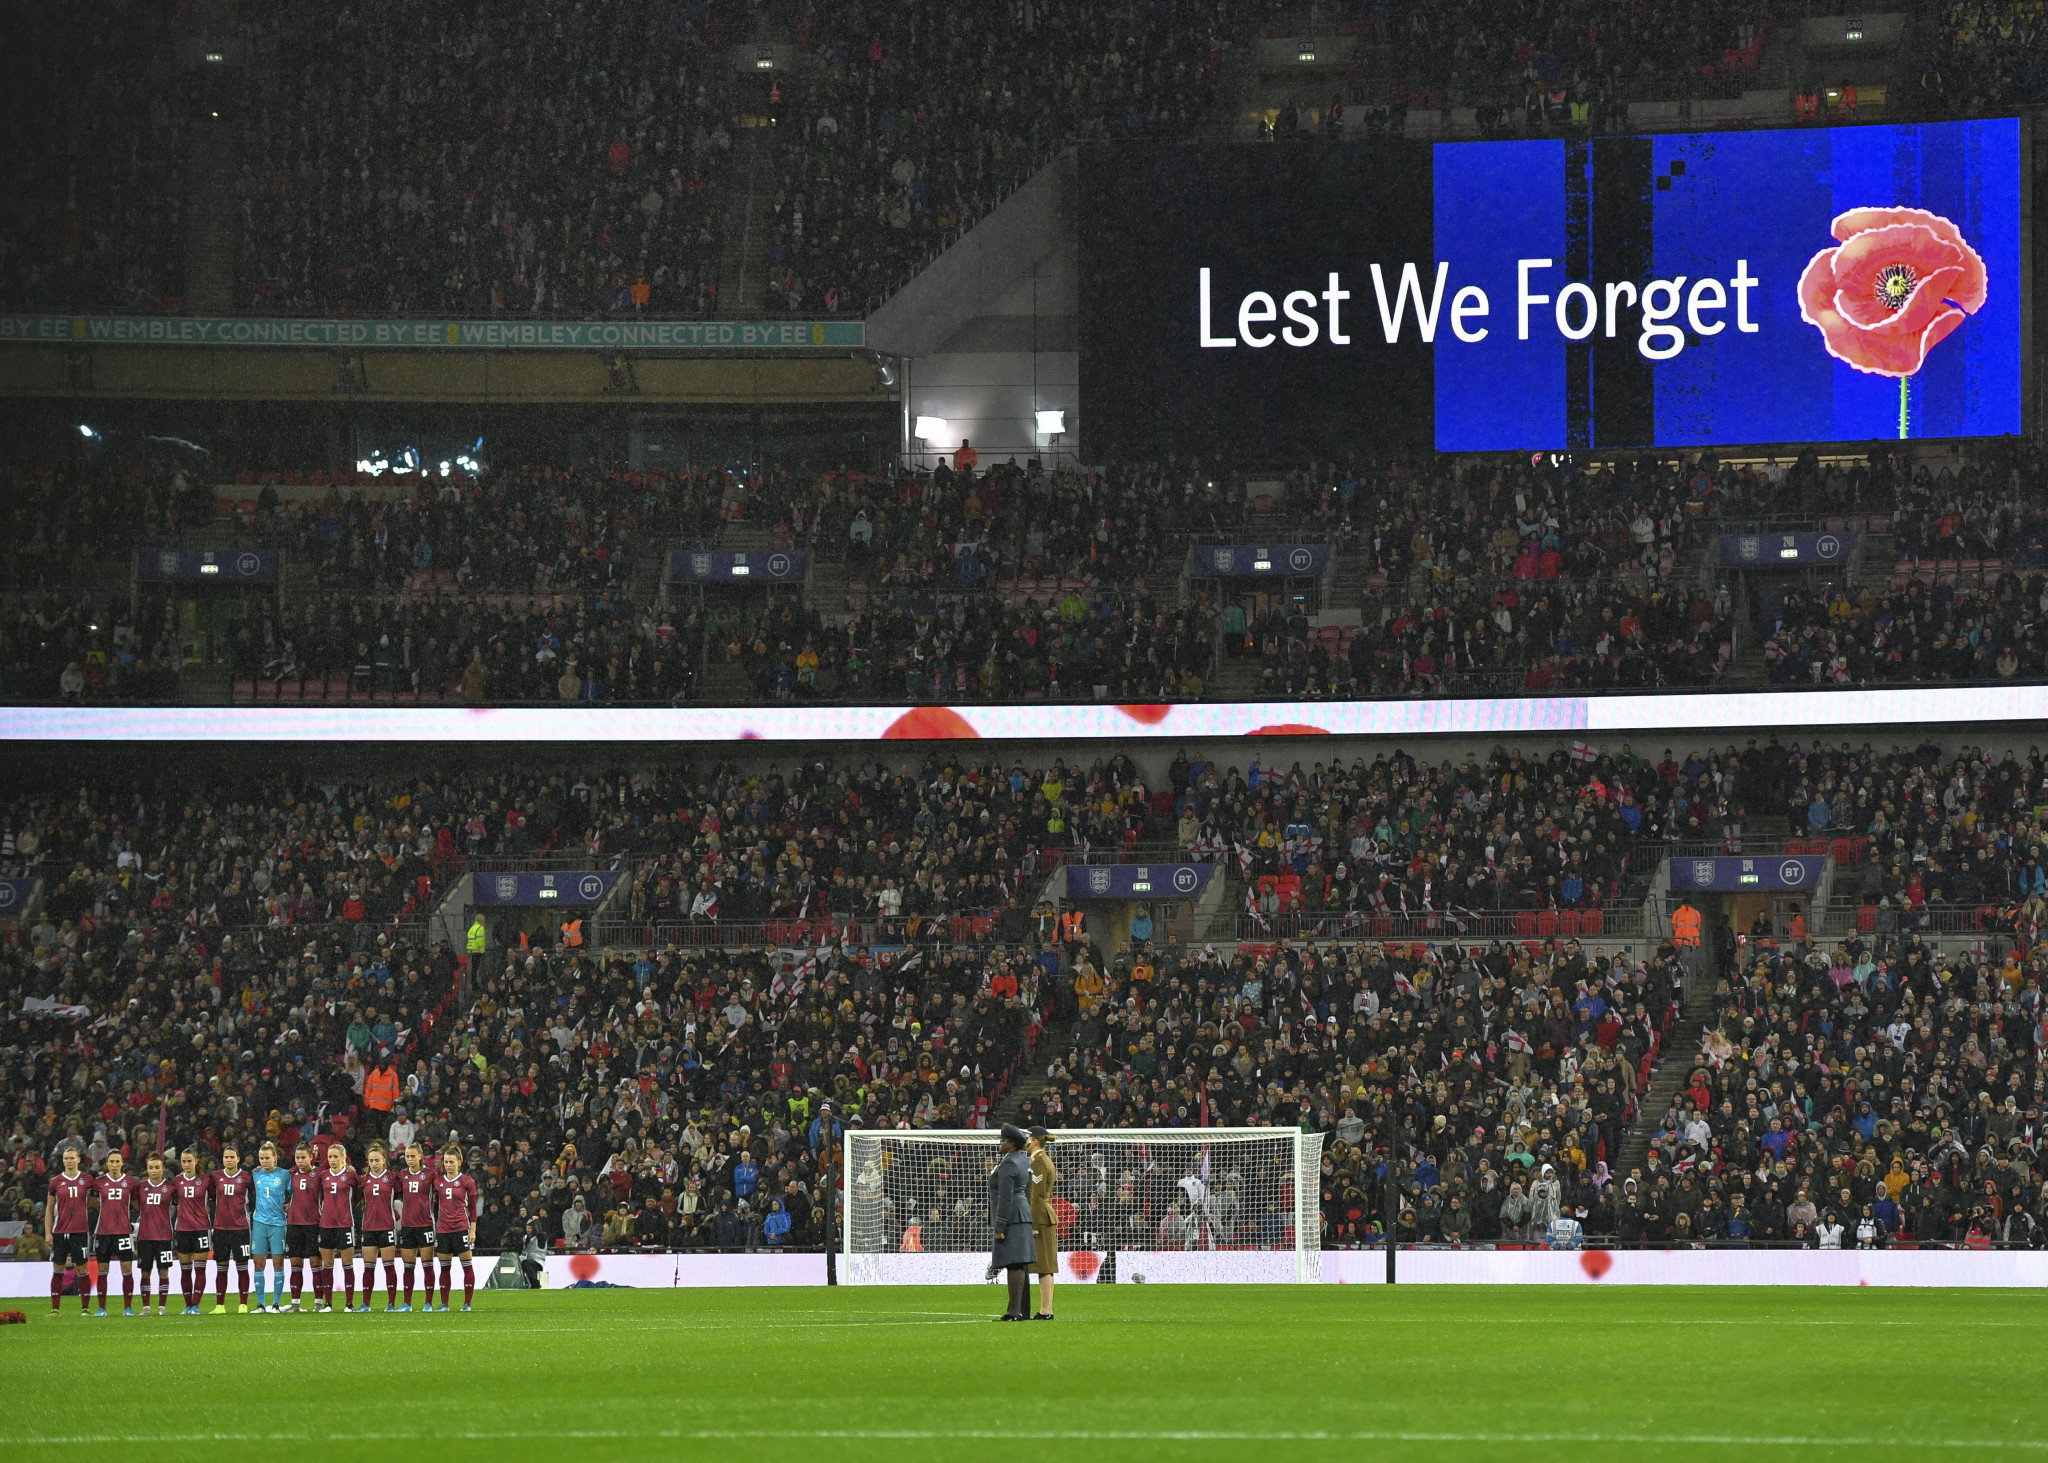 Players from both England and Germany wore poppies on their shirts during the women's international at Wembley Stadium last weekend to mark Remembrance Day ©Getty Images